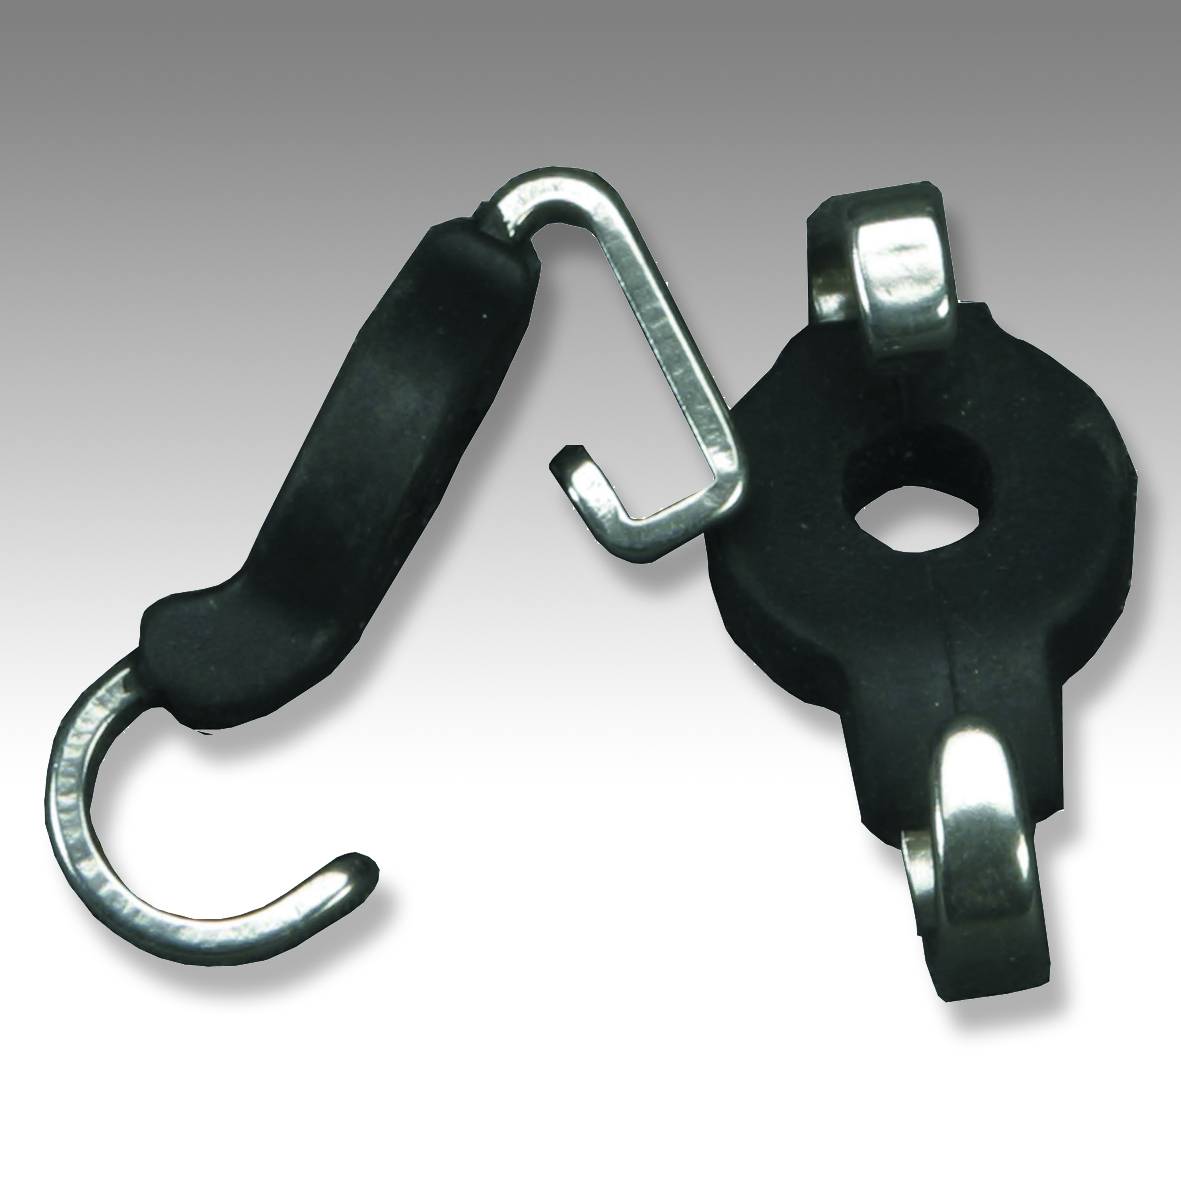 Metalab Curb Chain Hooks With Rubber | eBay